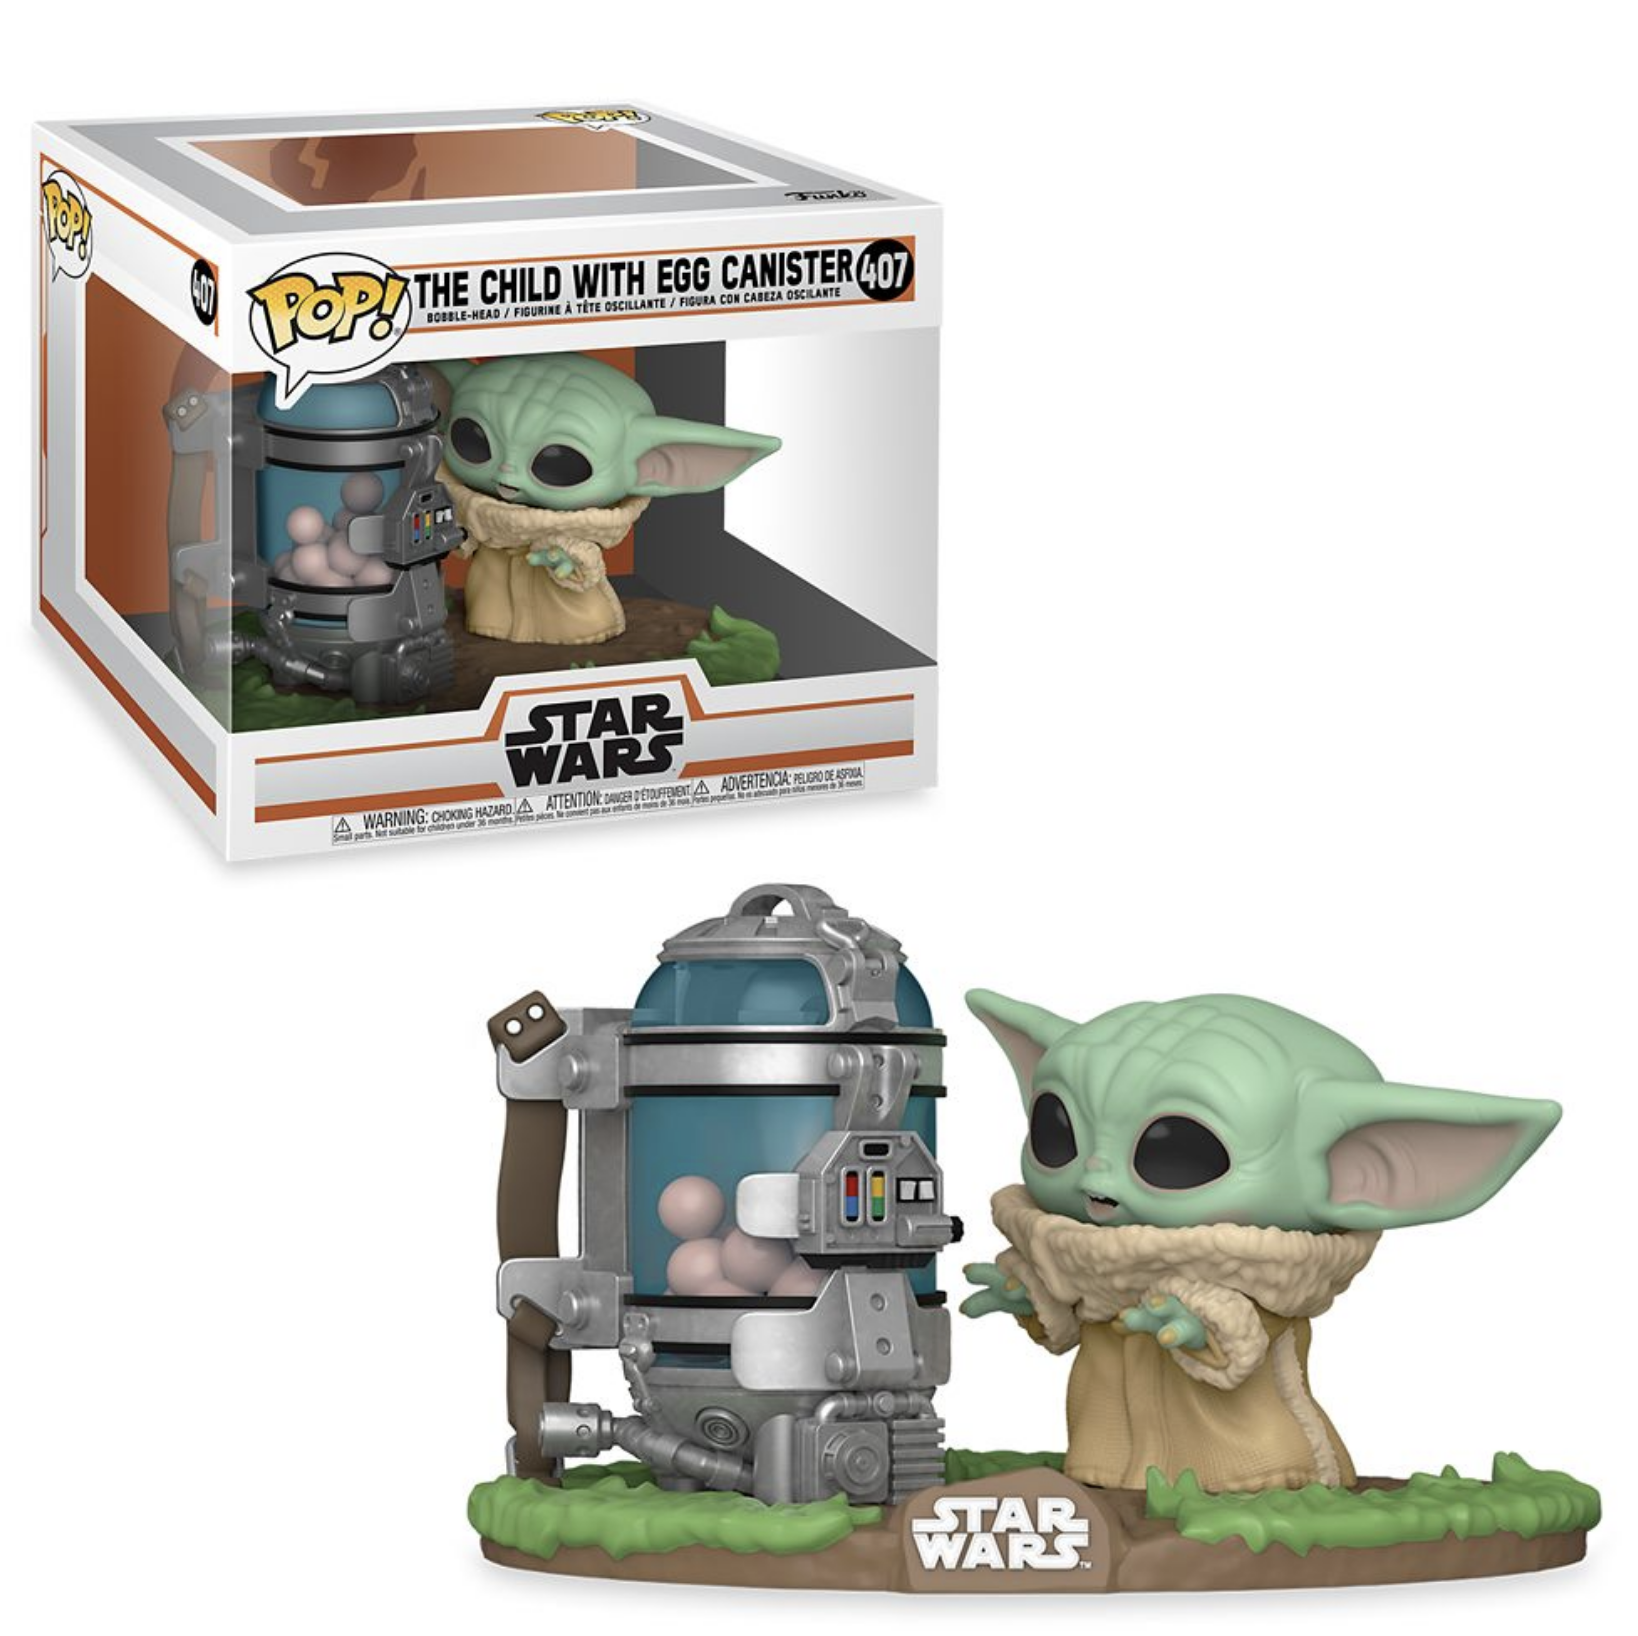 Details about   Funko Pop Star Wars The Mandalorian The Child Baby Yoda With Egg Canister 407 